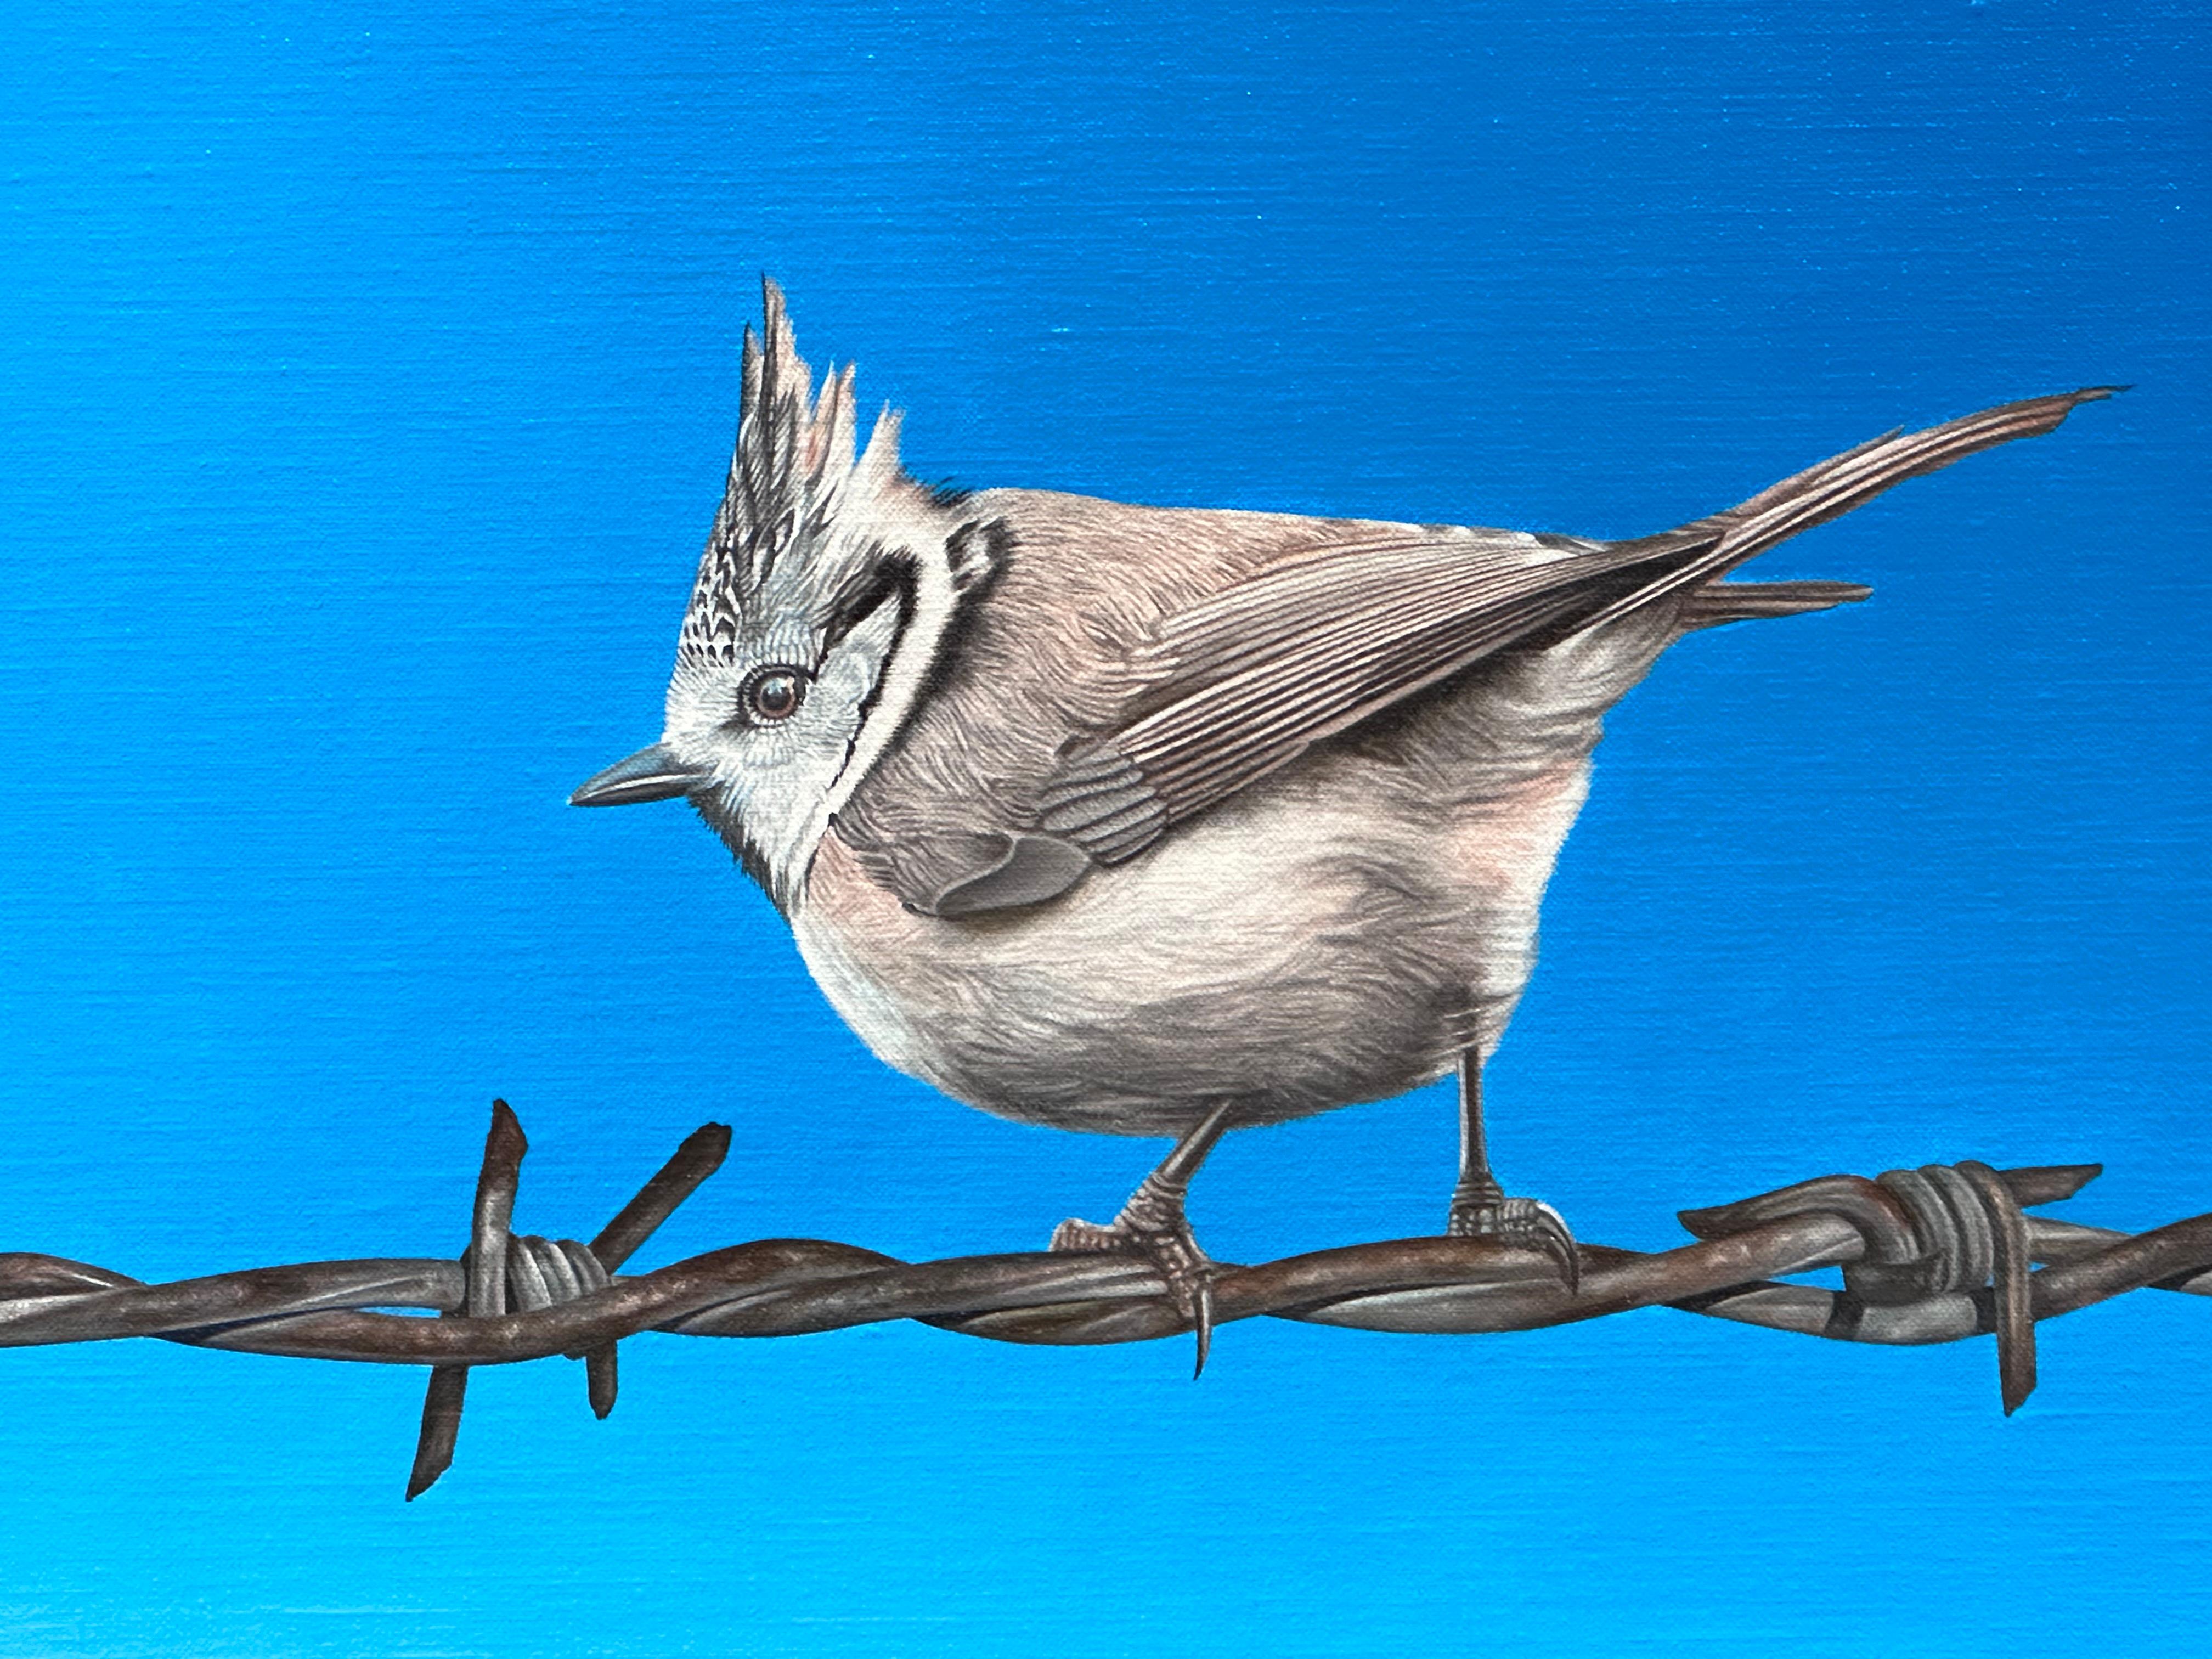 Freedom VIII - 21st Century  painting of a bird on barbed wire - Painting by JP Marsman